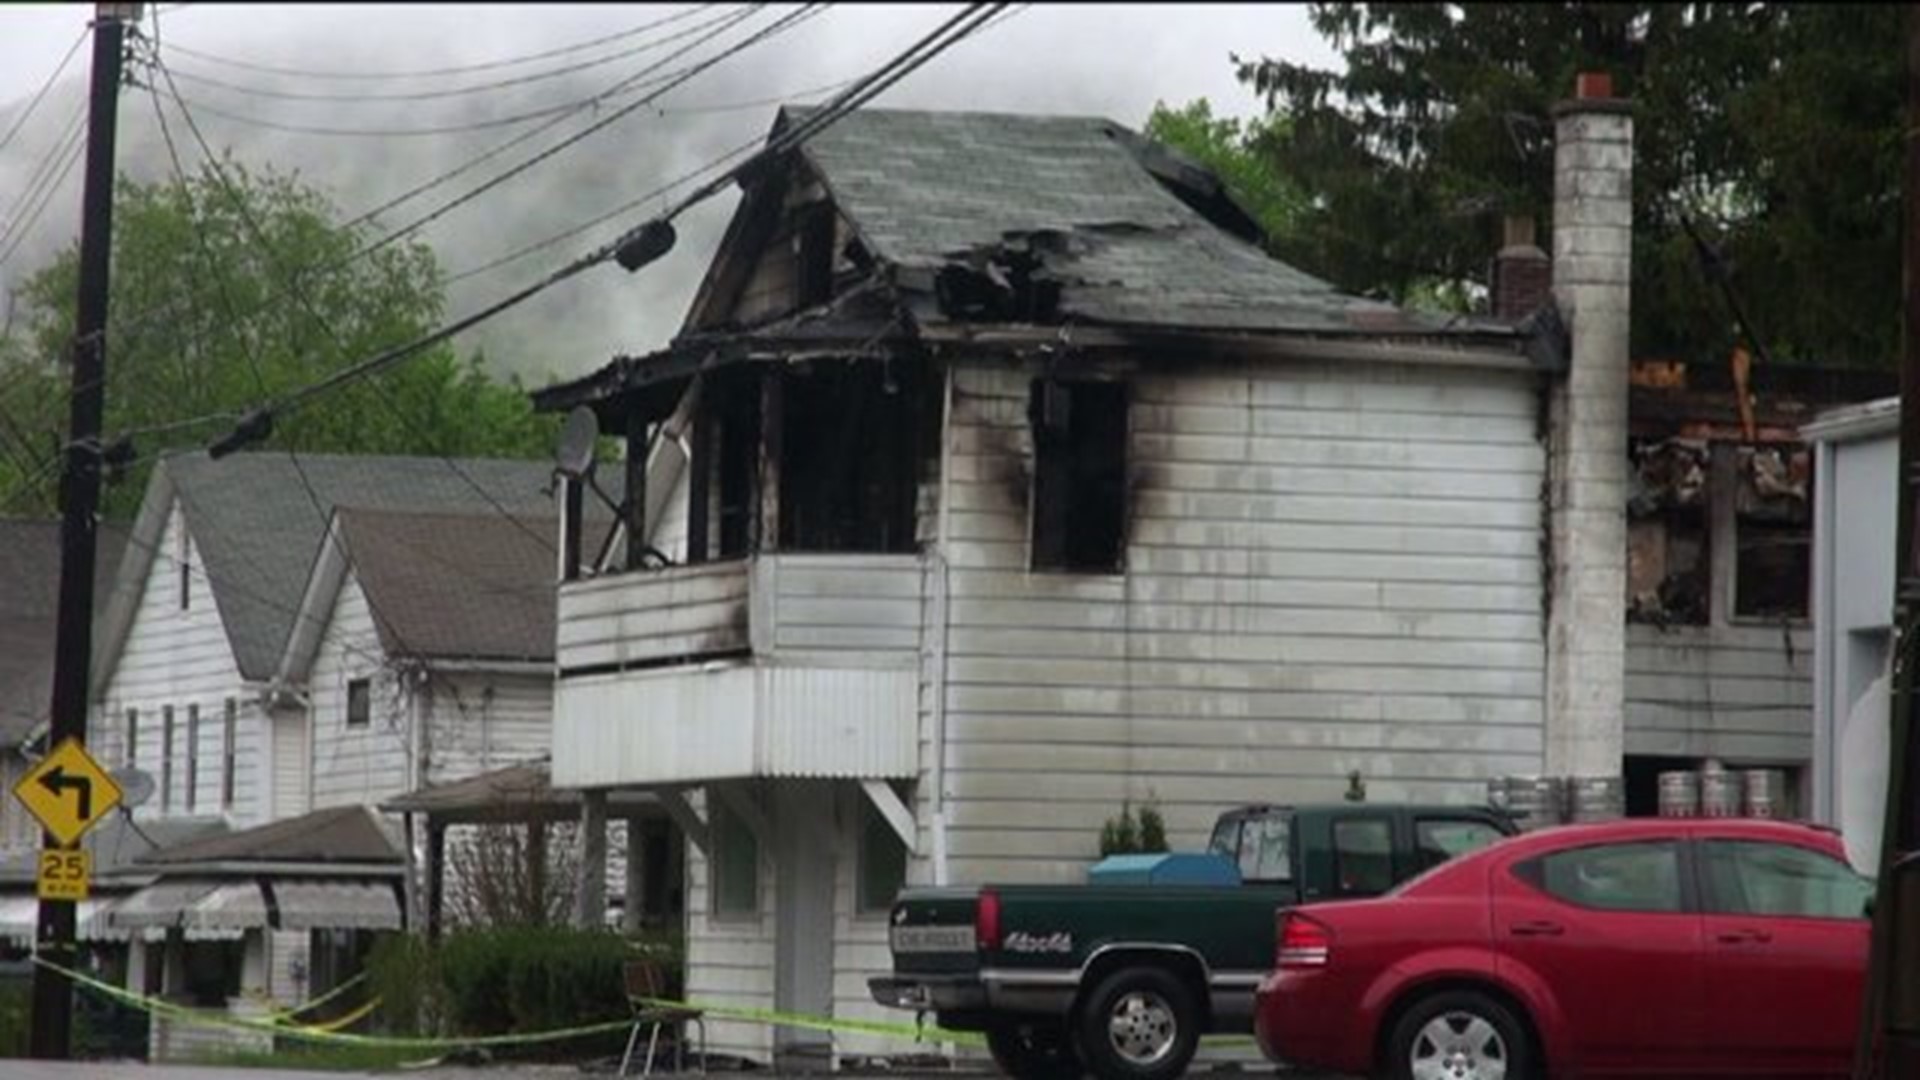 Deadly Fire Started By Lighter, Possible Dispatch Issues Investigated